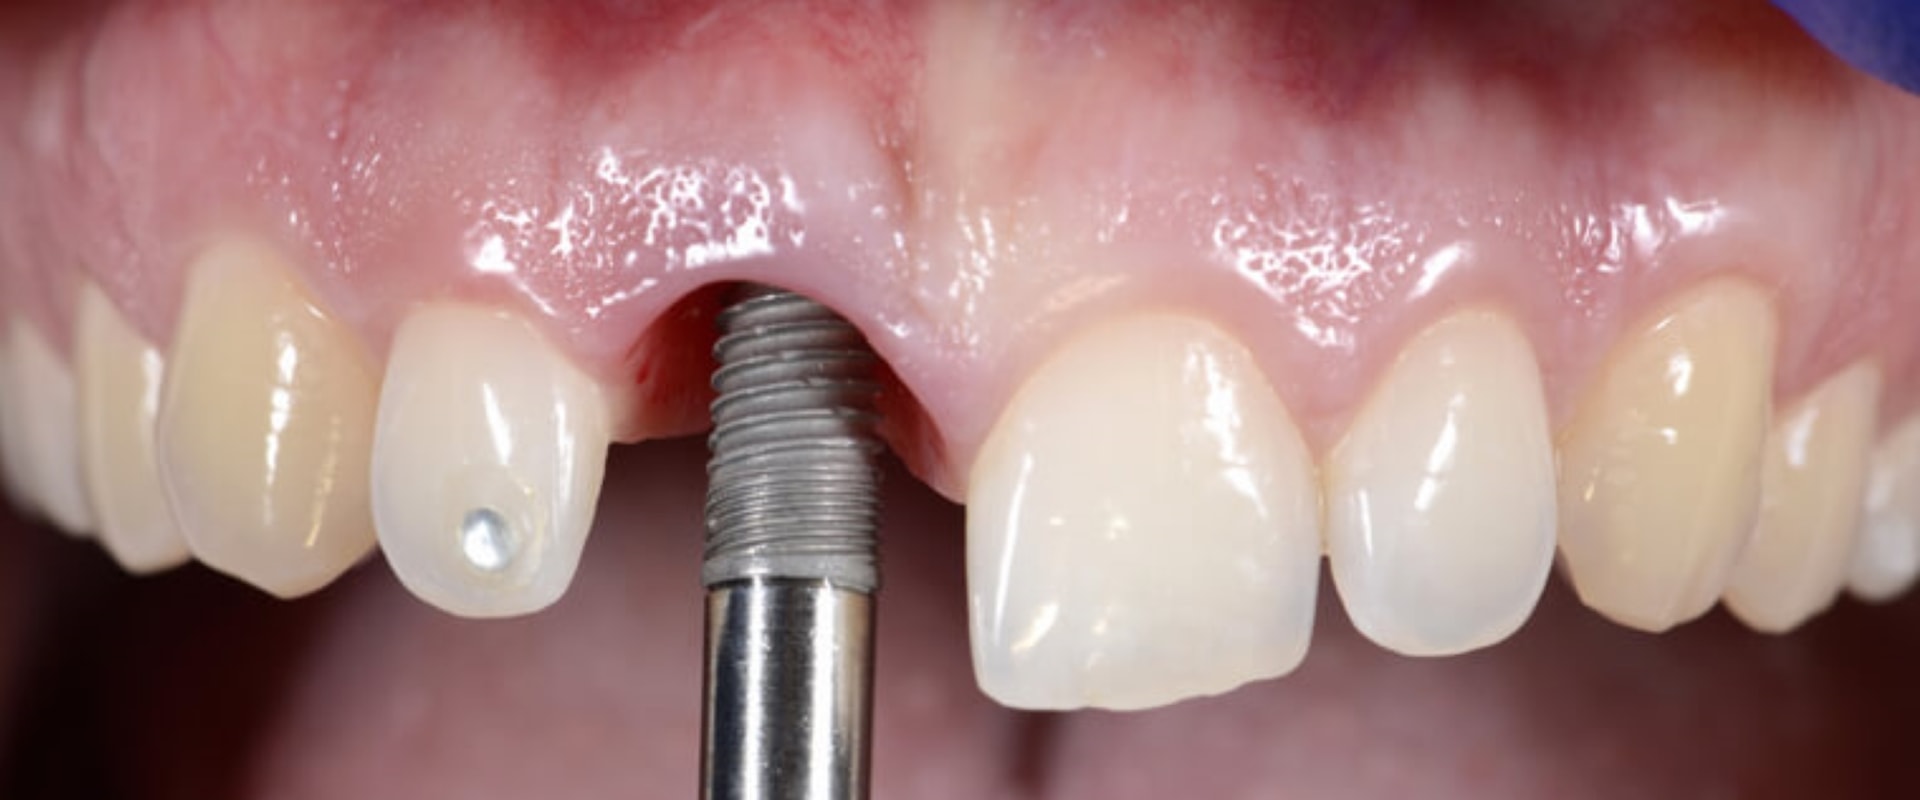 Discovering The Benefits Of Dental Implants In Austin